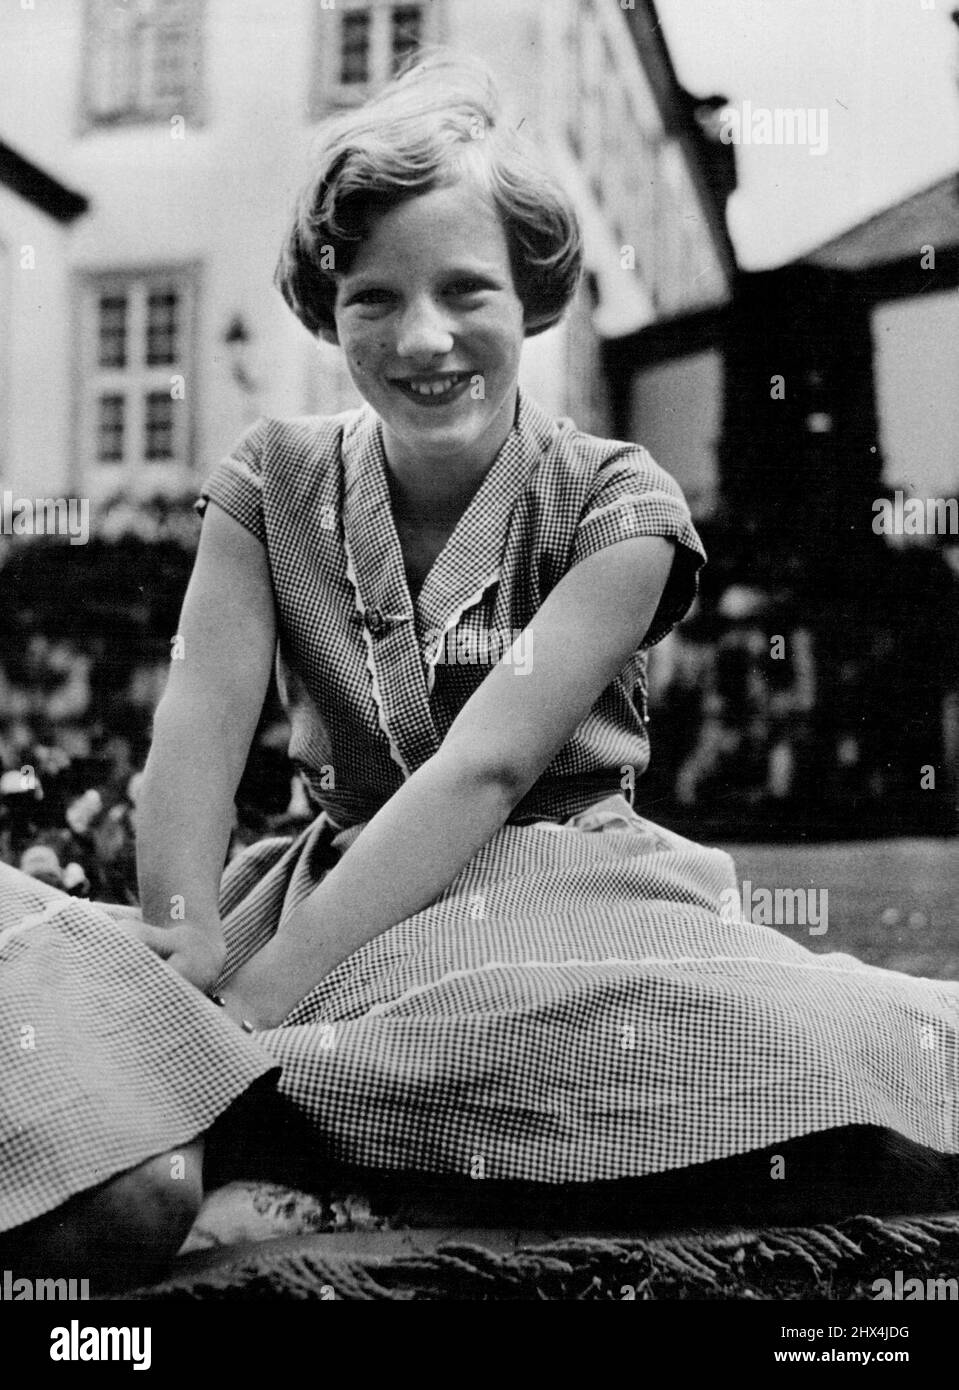 Heir to the throne of Denmark; Princess Margrethe. A new portrait of the 13-year-old daughter of king Frederik and Queen Ingrid of Denmark. June 1, 1953. (Photo by Inga Aistrup, Camera Press). Stock Photo